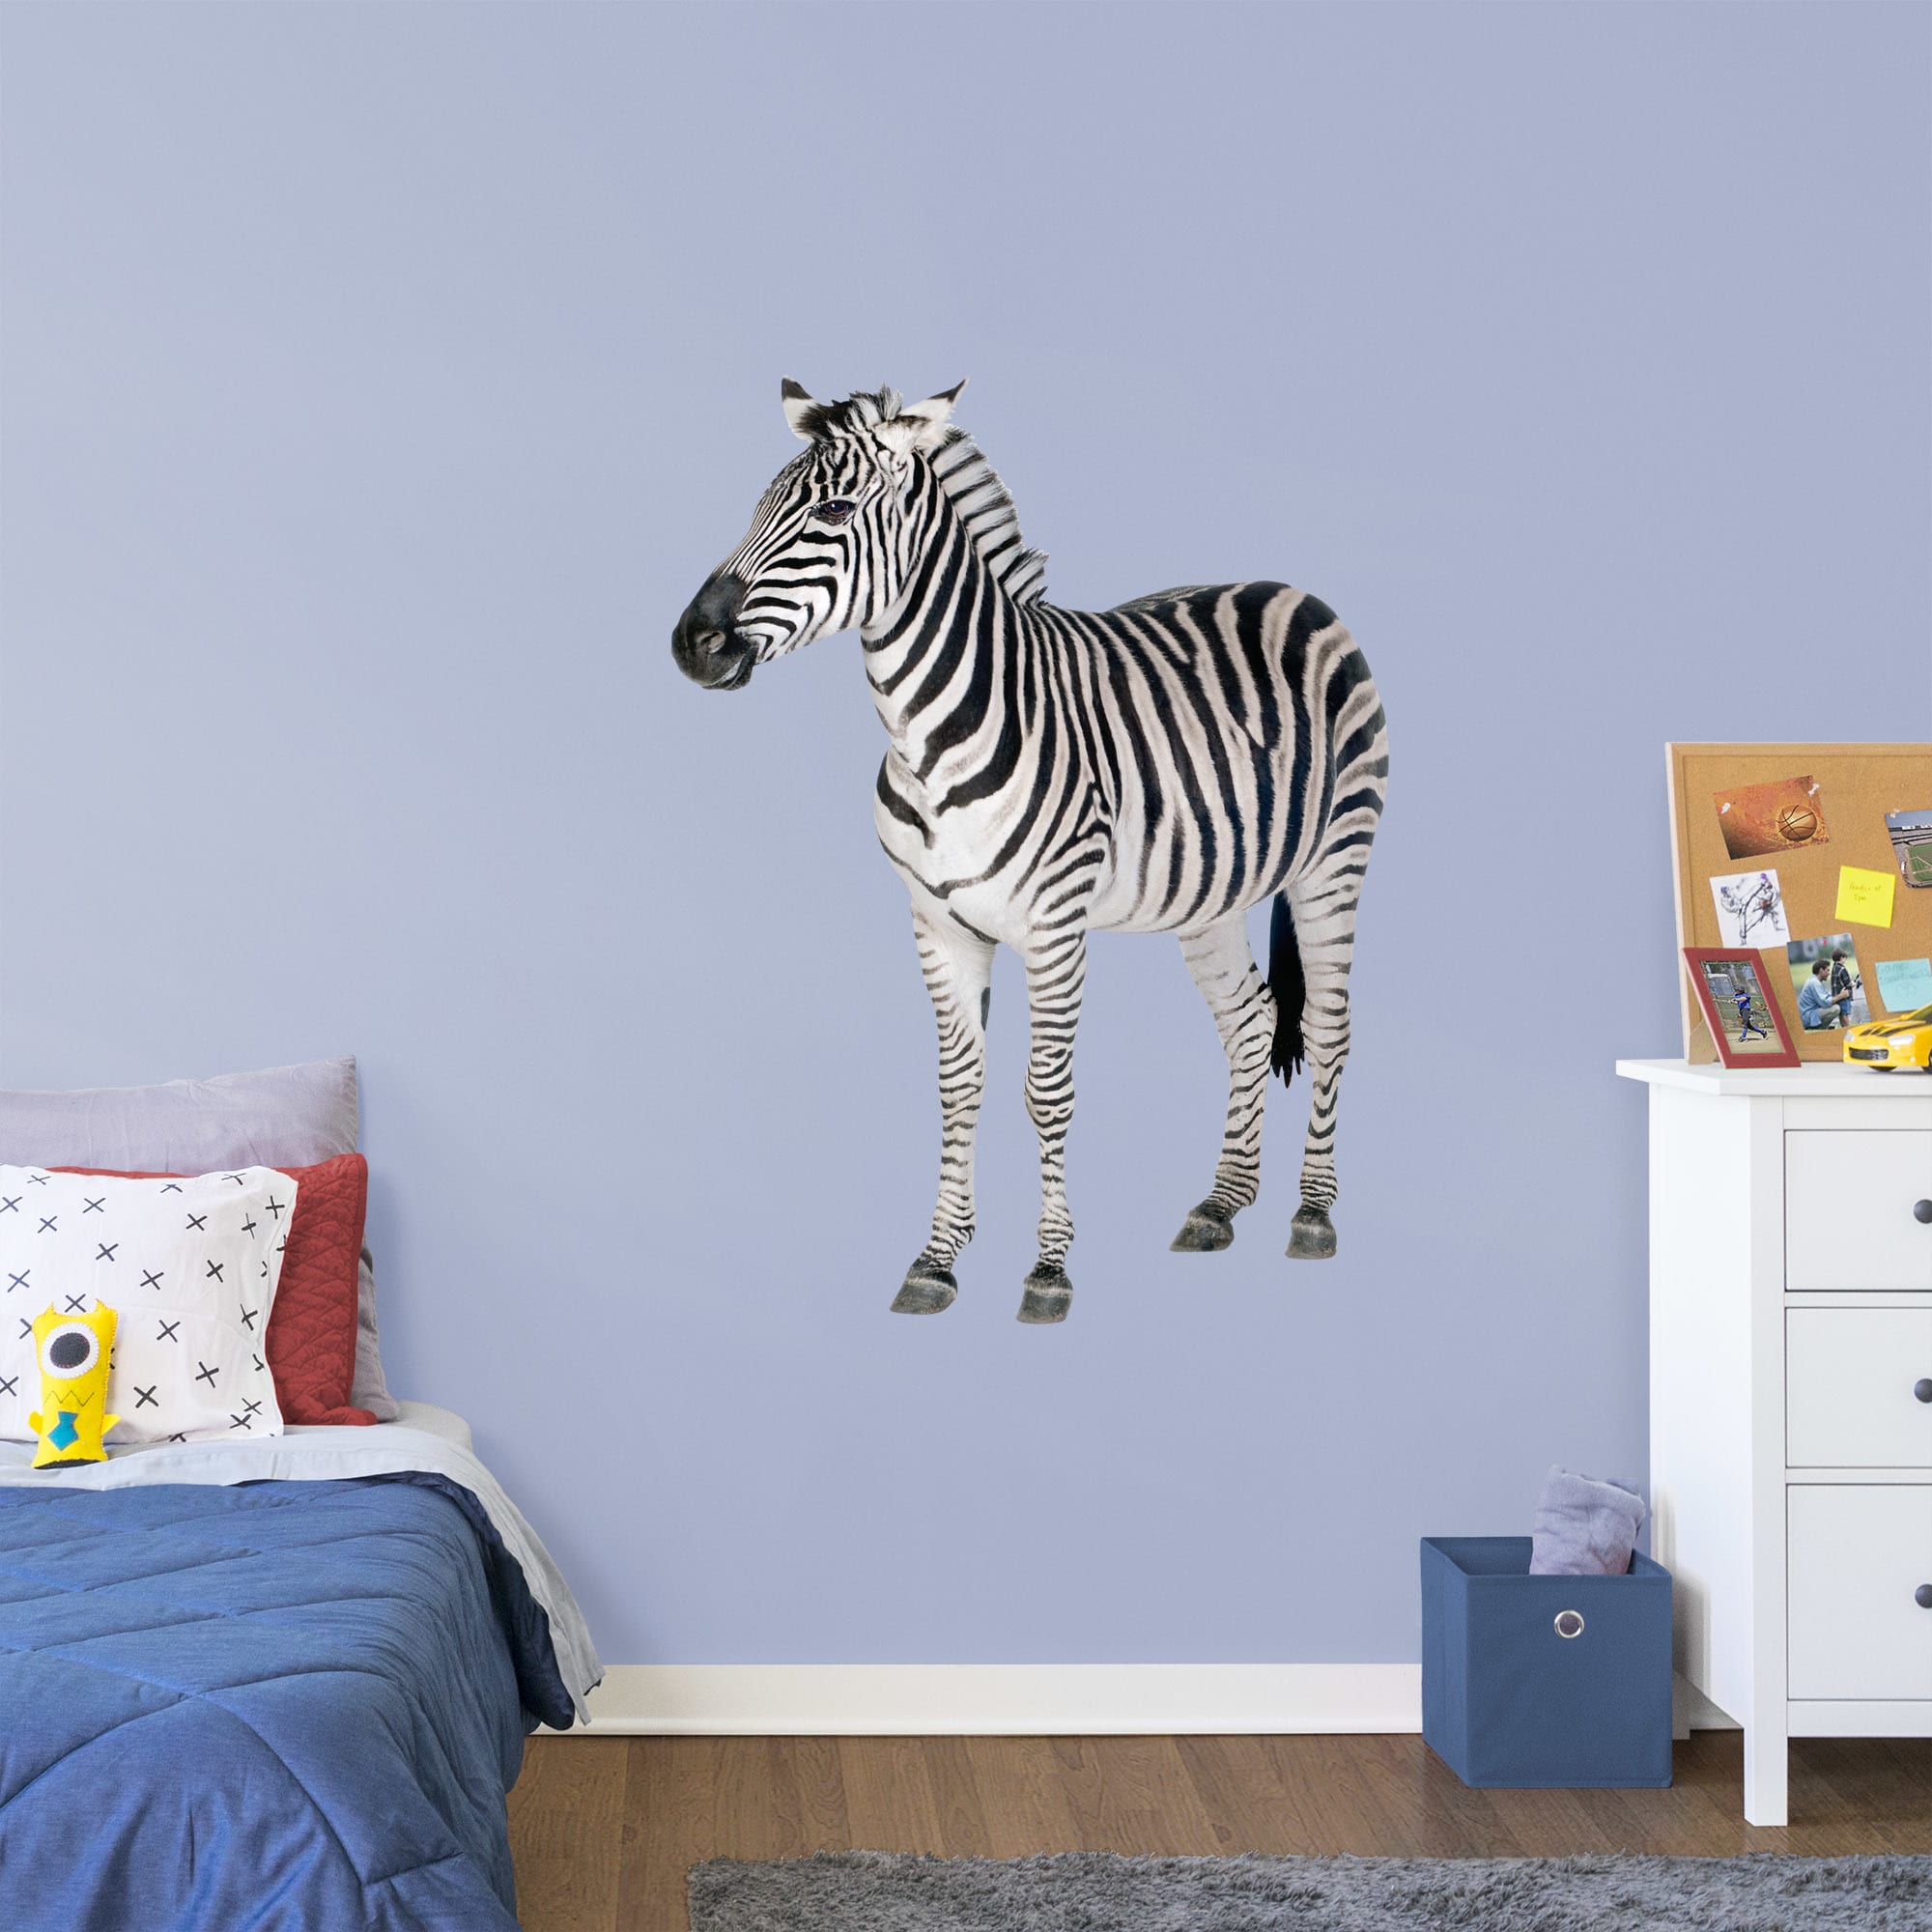 Zebra - Removable Vinyl Decal Giant Animal + 2 Decals (37"W x 49"H) by Fathead